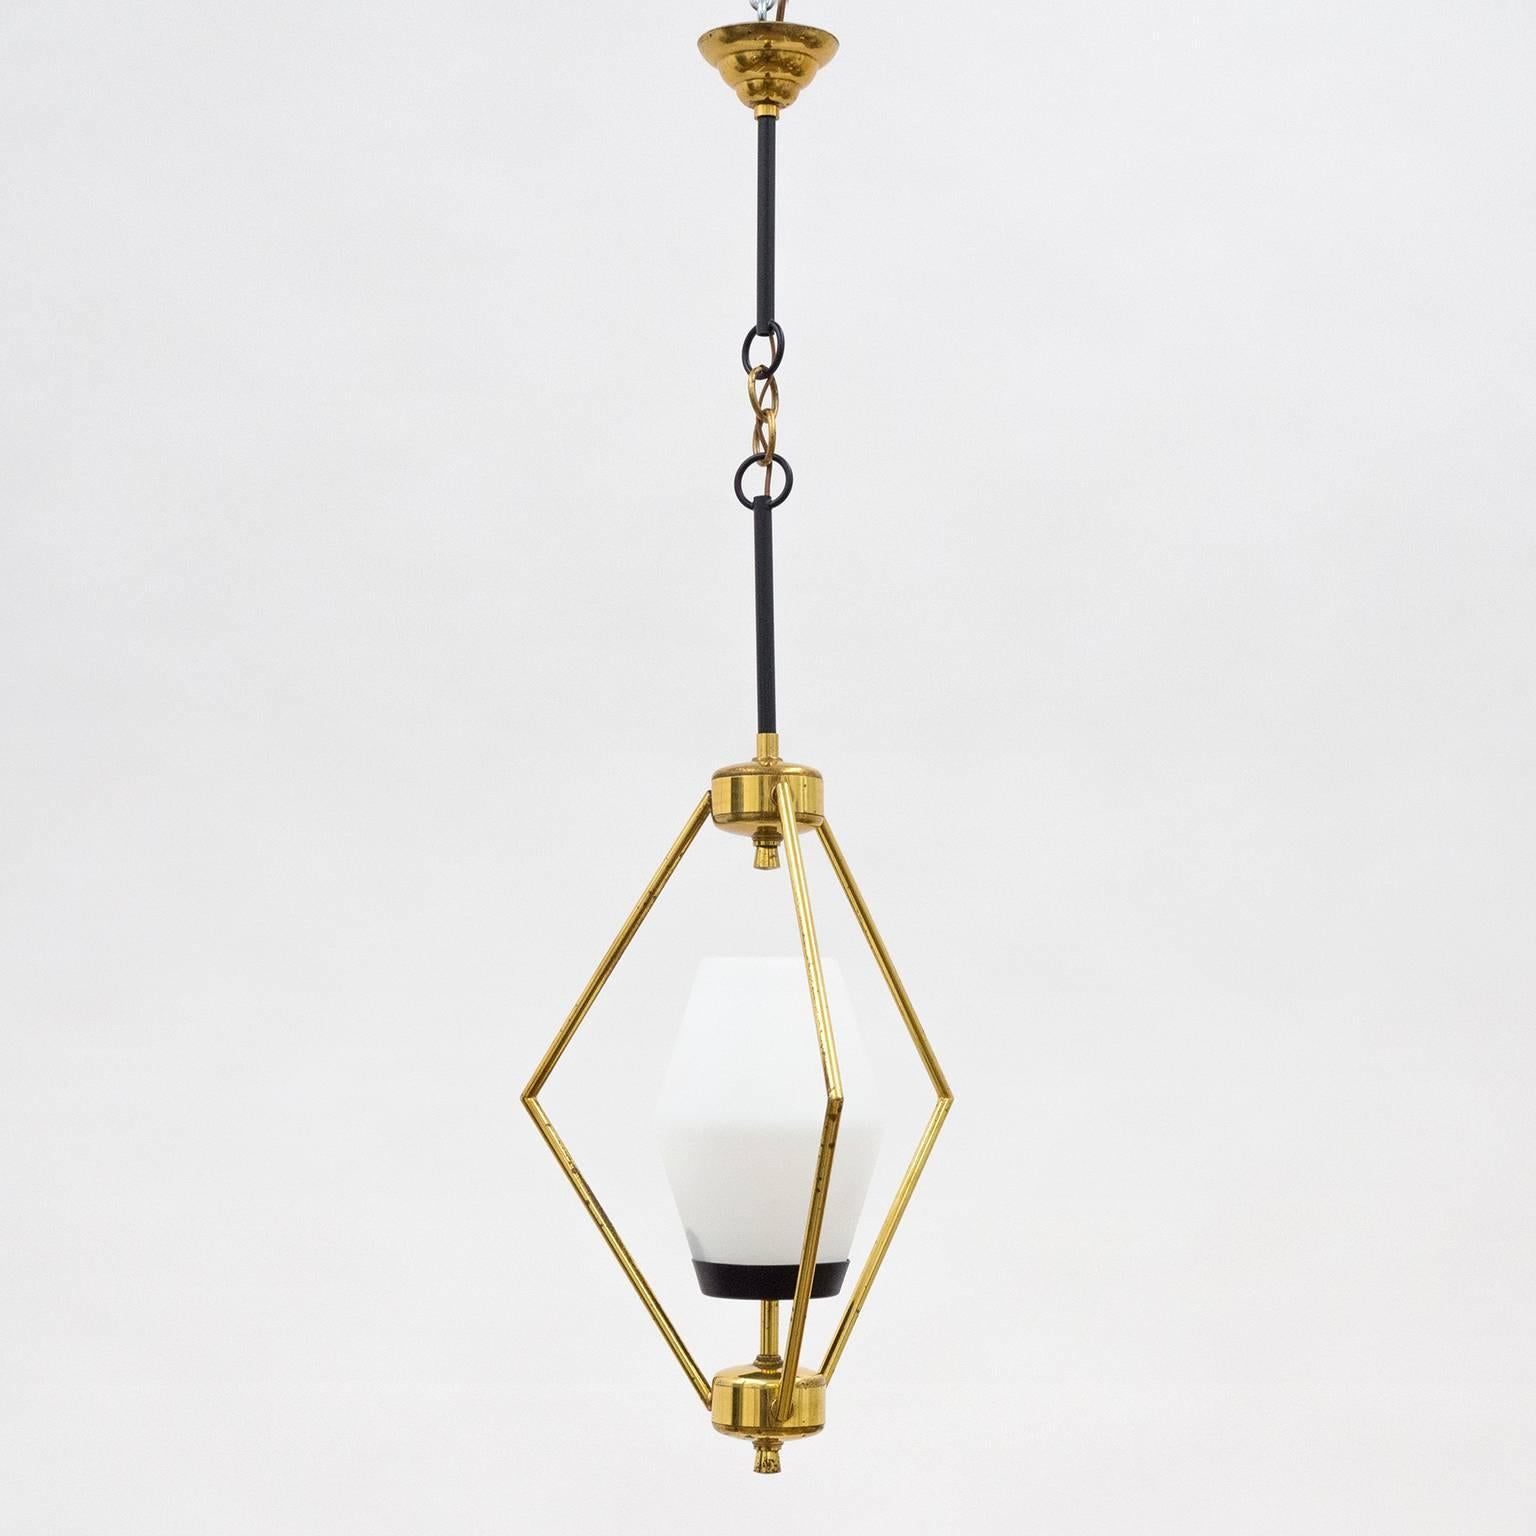 Very unusual brass and glass pendant or lantern from the 1950s. Another fine example of how Italian designers during this period reinterpreted traditional design with a sculptural and Minimalist approach. One original brass and ceramic E14 socket